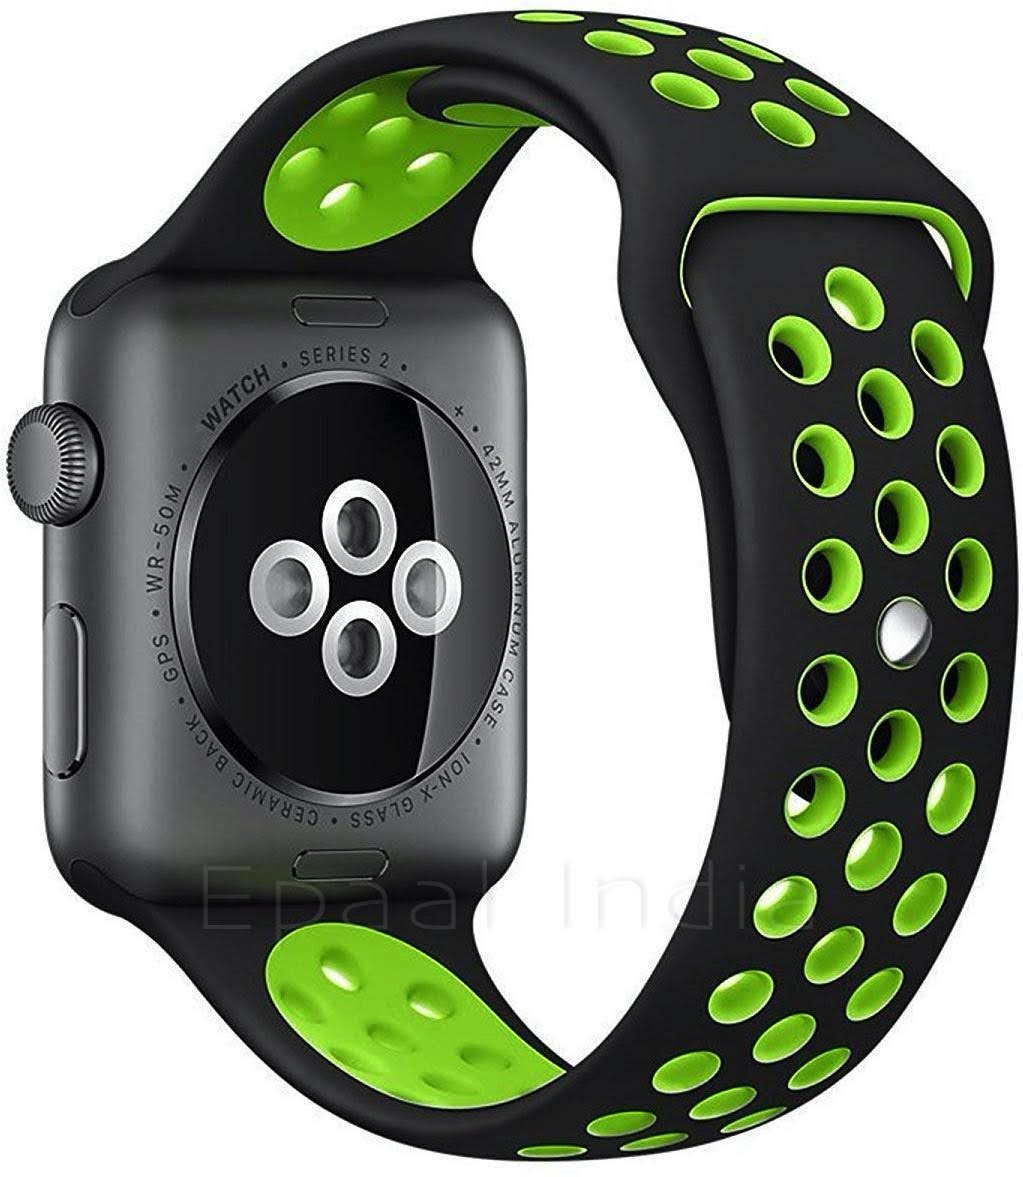 Epaal Breathable Sports Silicone Strap for Apple iWatch Series 4/5 [42mm / 44mm]